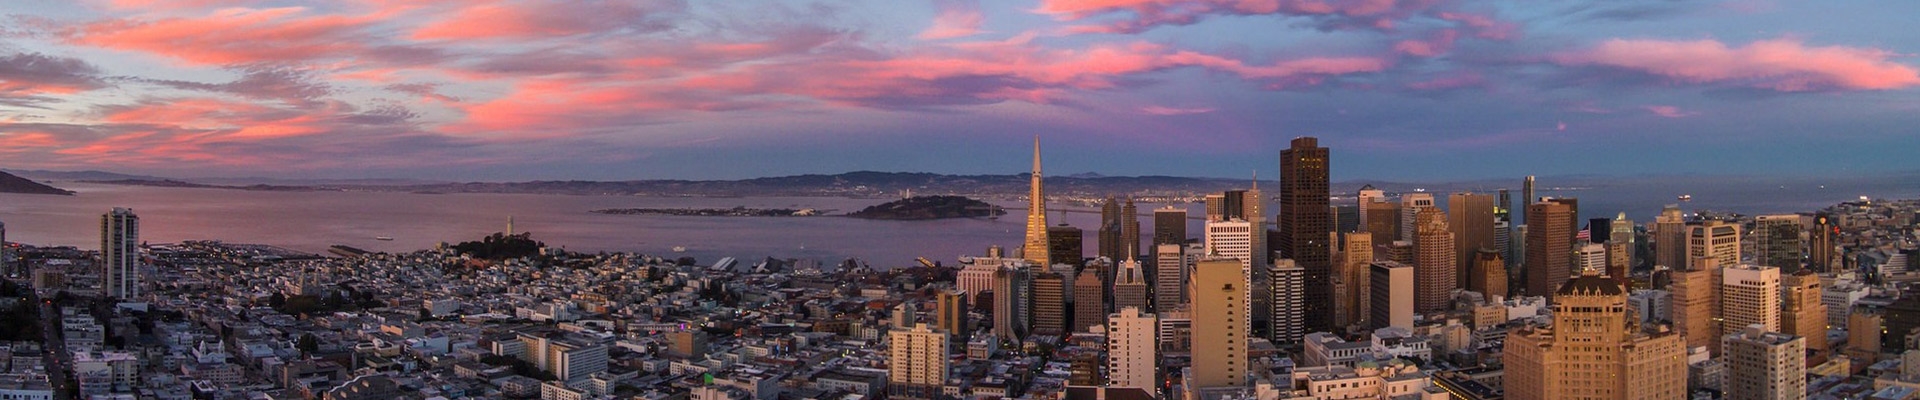 San Francisco cityscape at sunset, with pink clouds